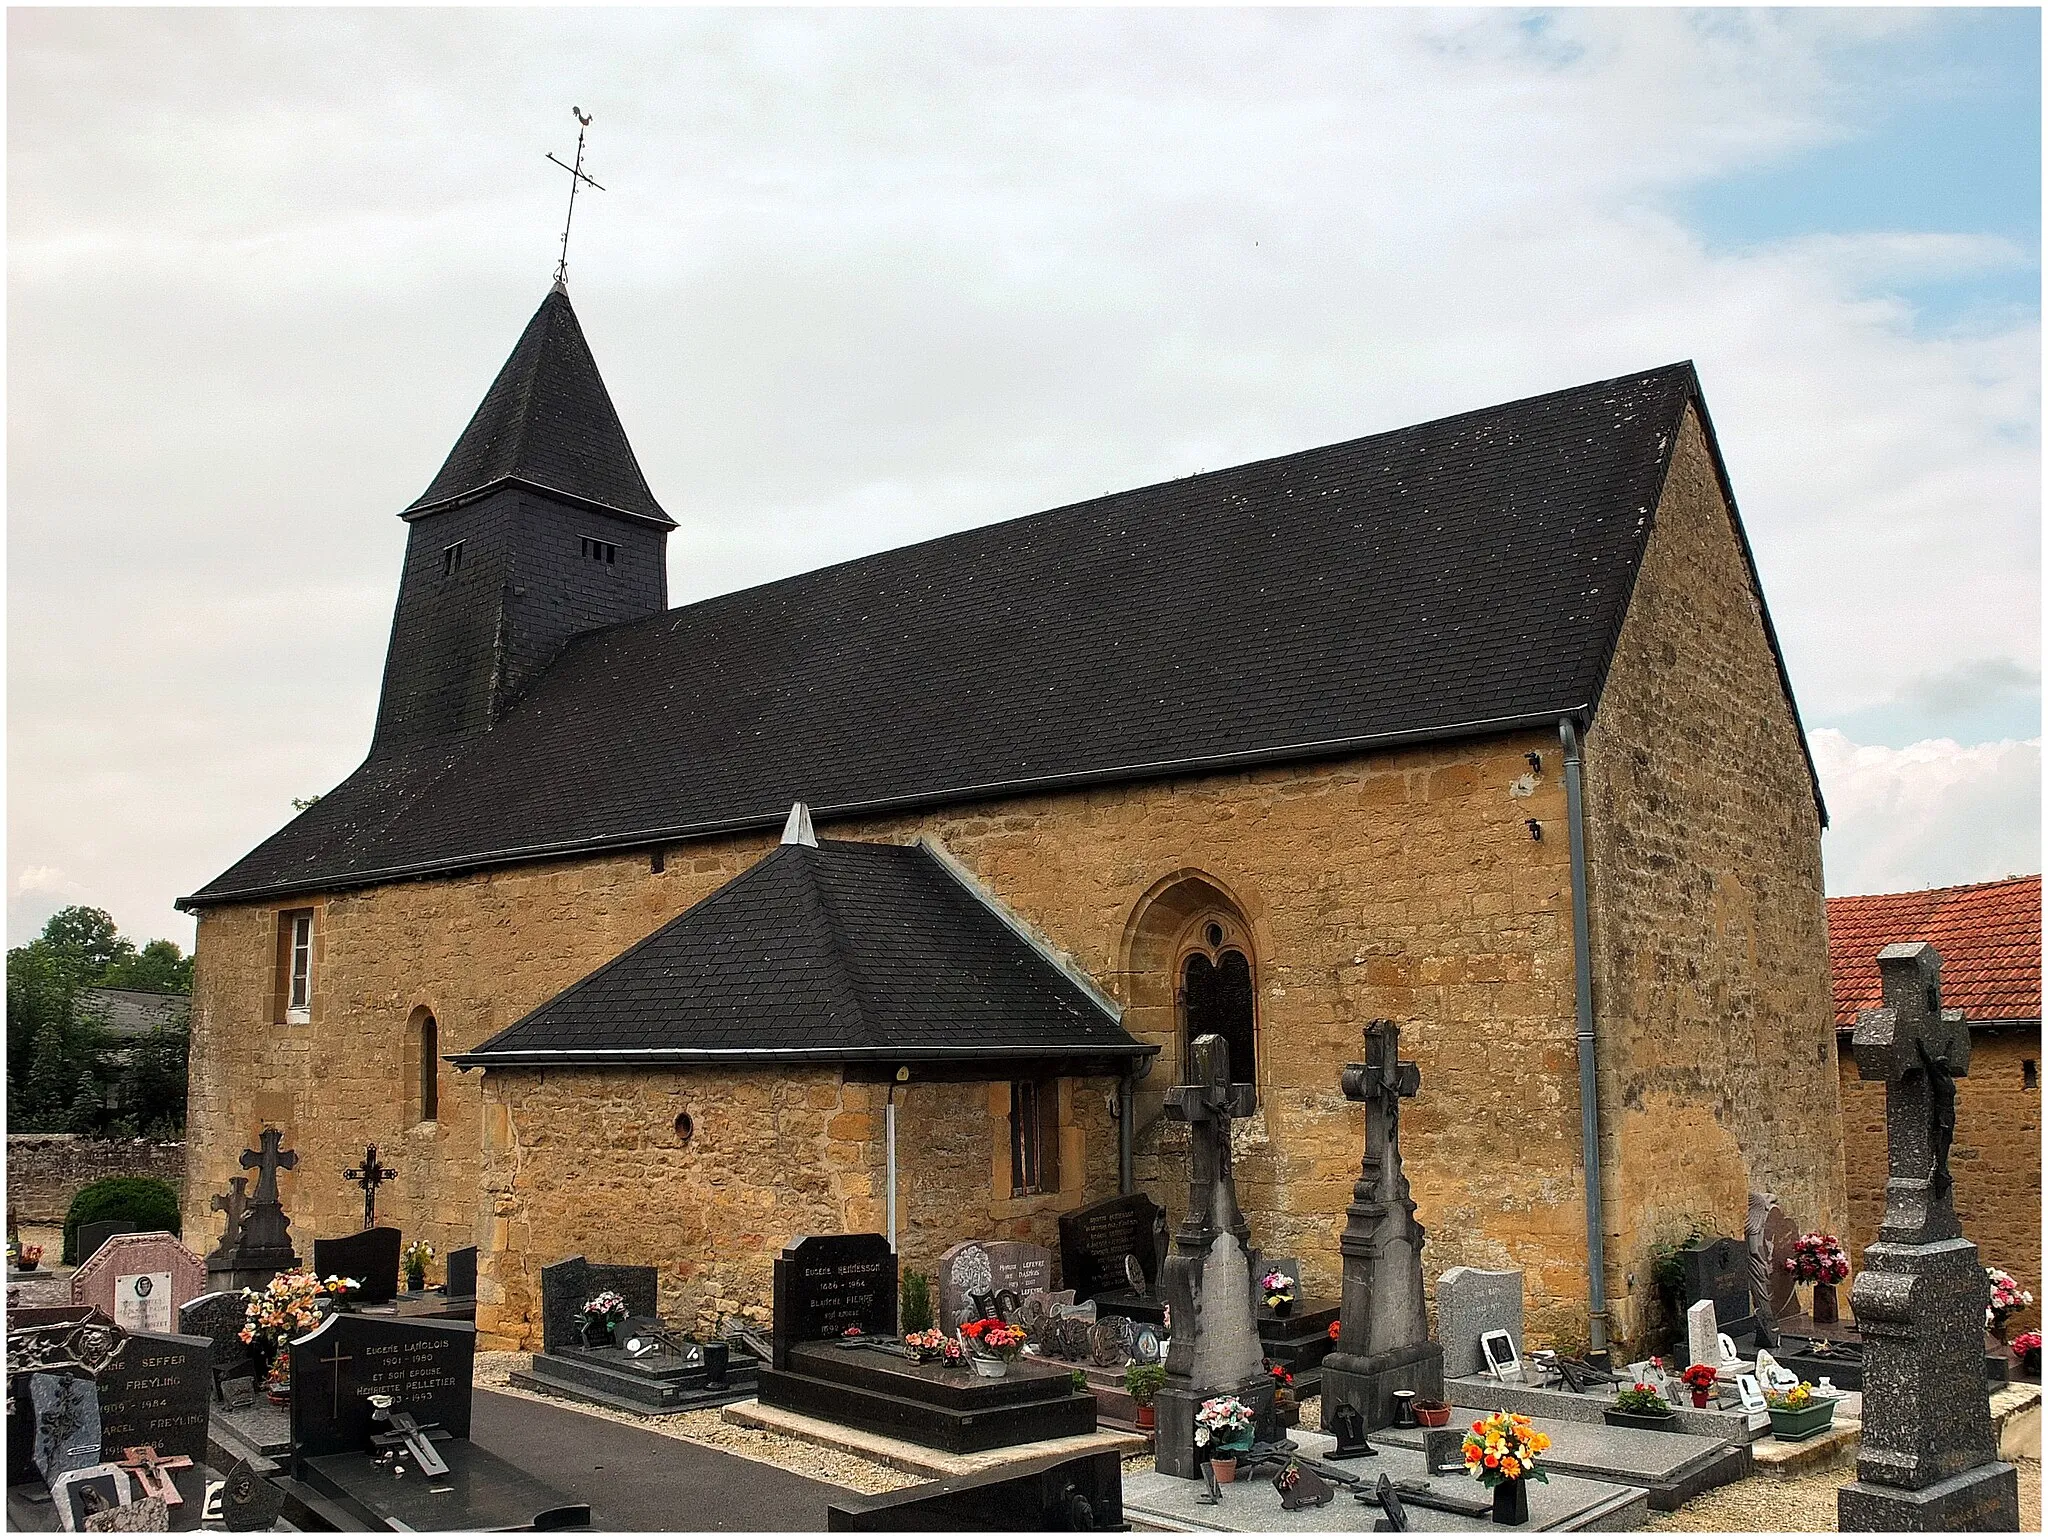 Photo showing: Étrépigny -Saint-Julien Church. This building, whose structure could date back to the 13th century due to the narrow bays and consoles of the choir.  
From 1689 to 1729, the parish church of Étrepigny was occupied by an atheist priest, Father Jean Meslier, considered to be a precursor of the Lumières" see : https://en.wikipedia.org/wiki/Jean_Meslier